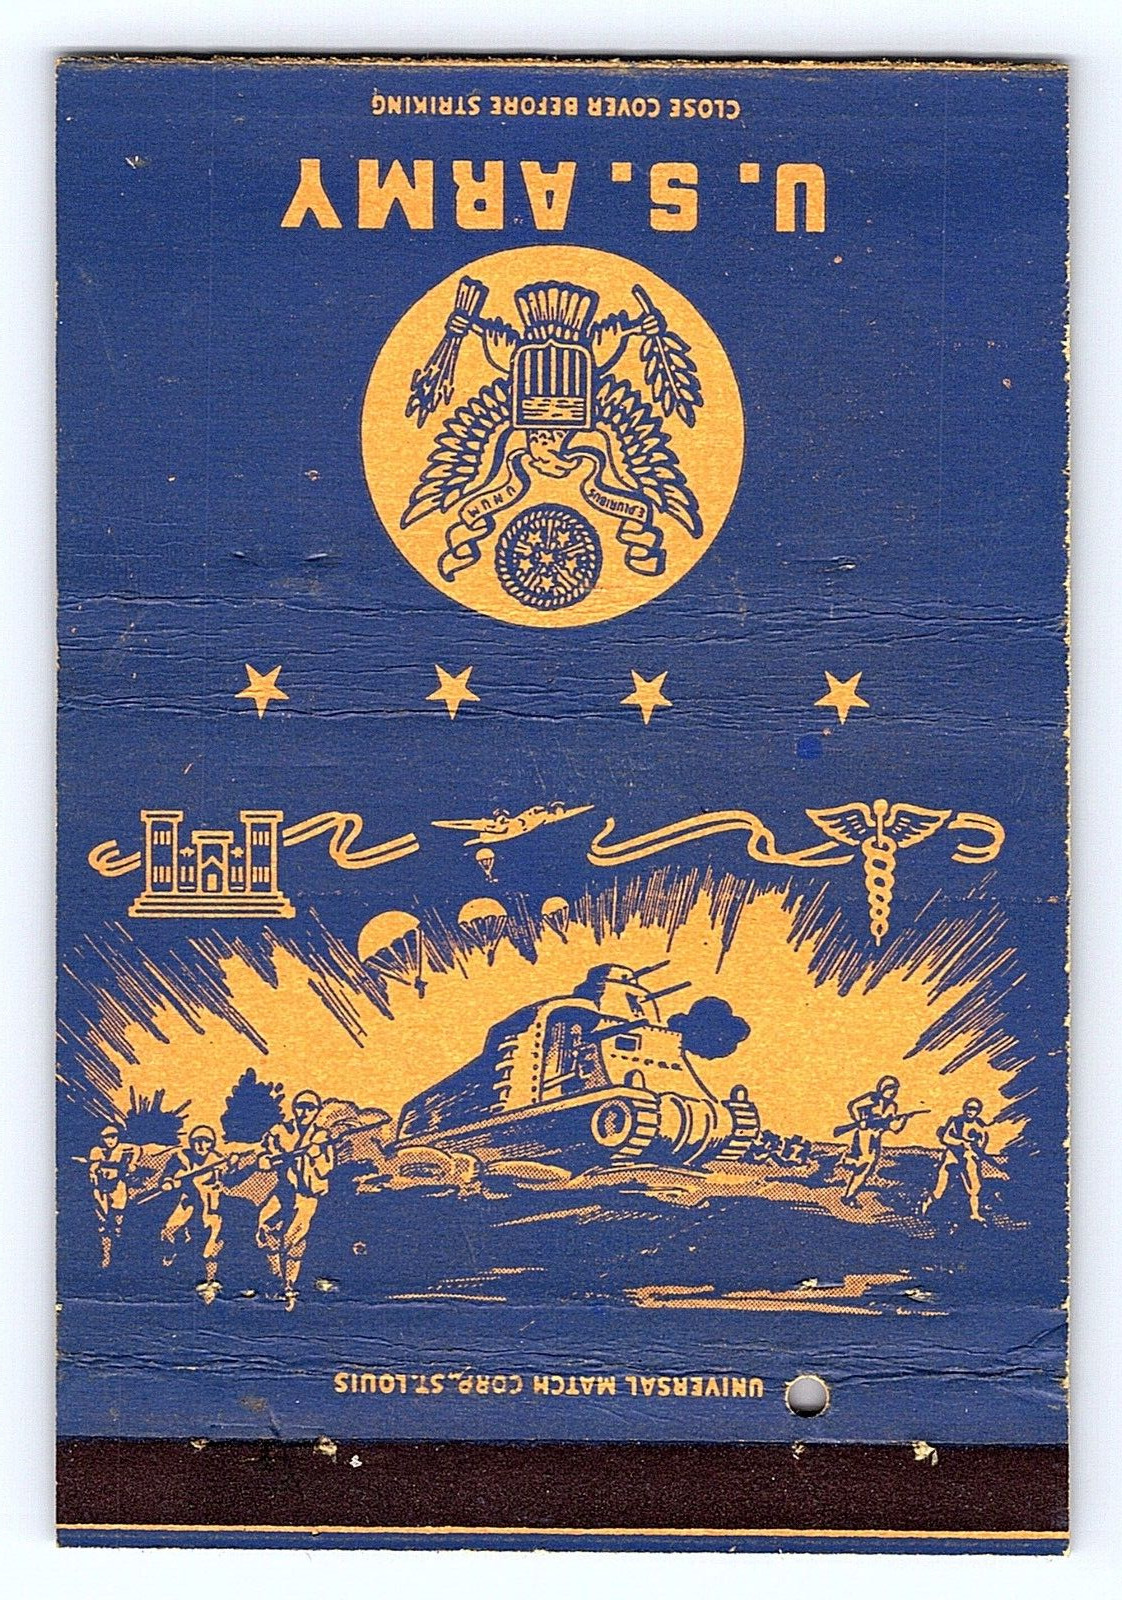 40-Strike Vintage Matchbook U.S. Army Tank and Infantry Graphics